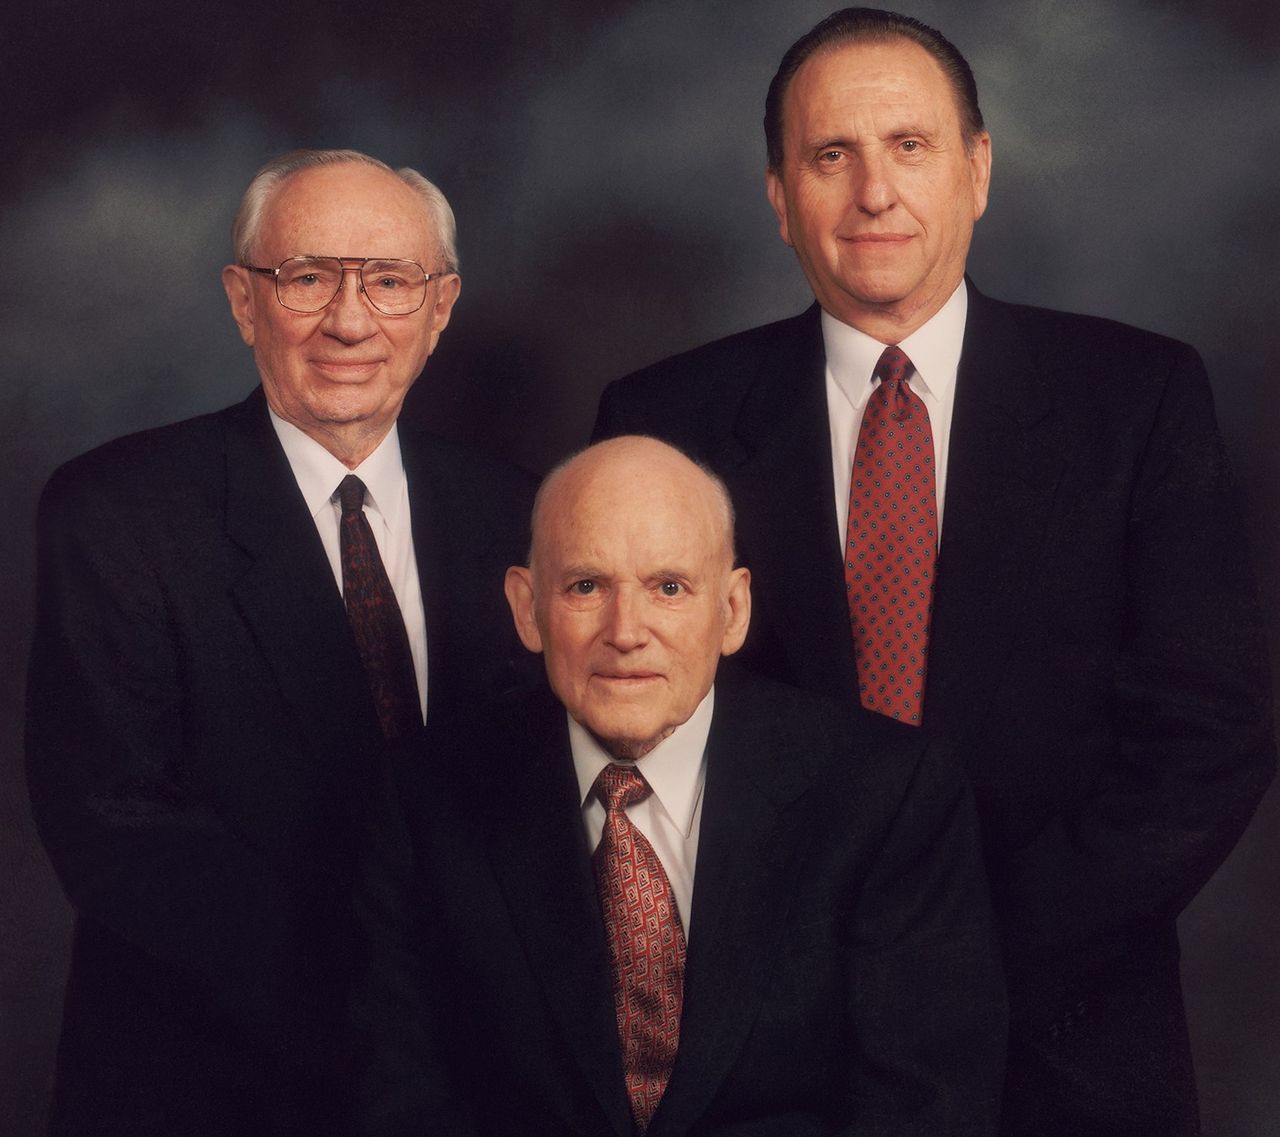 The First Presidency in 1994: President Howard W. Hunter (center) with his counselors, President Gordon B. Hinckley (left) and President Thomas S. Monson (right).